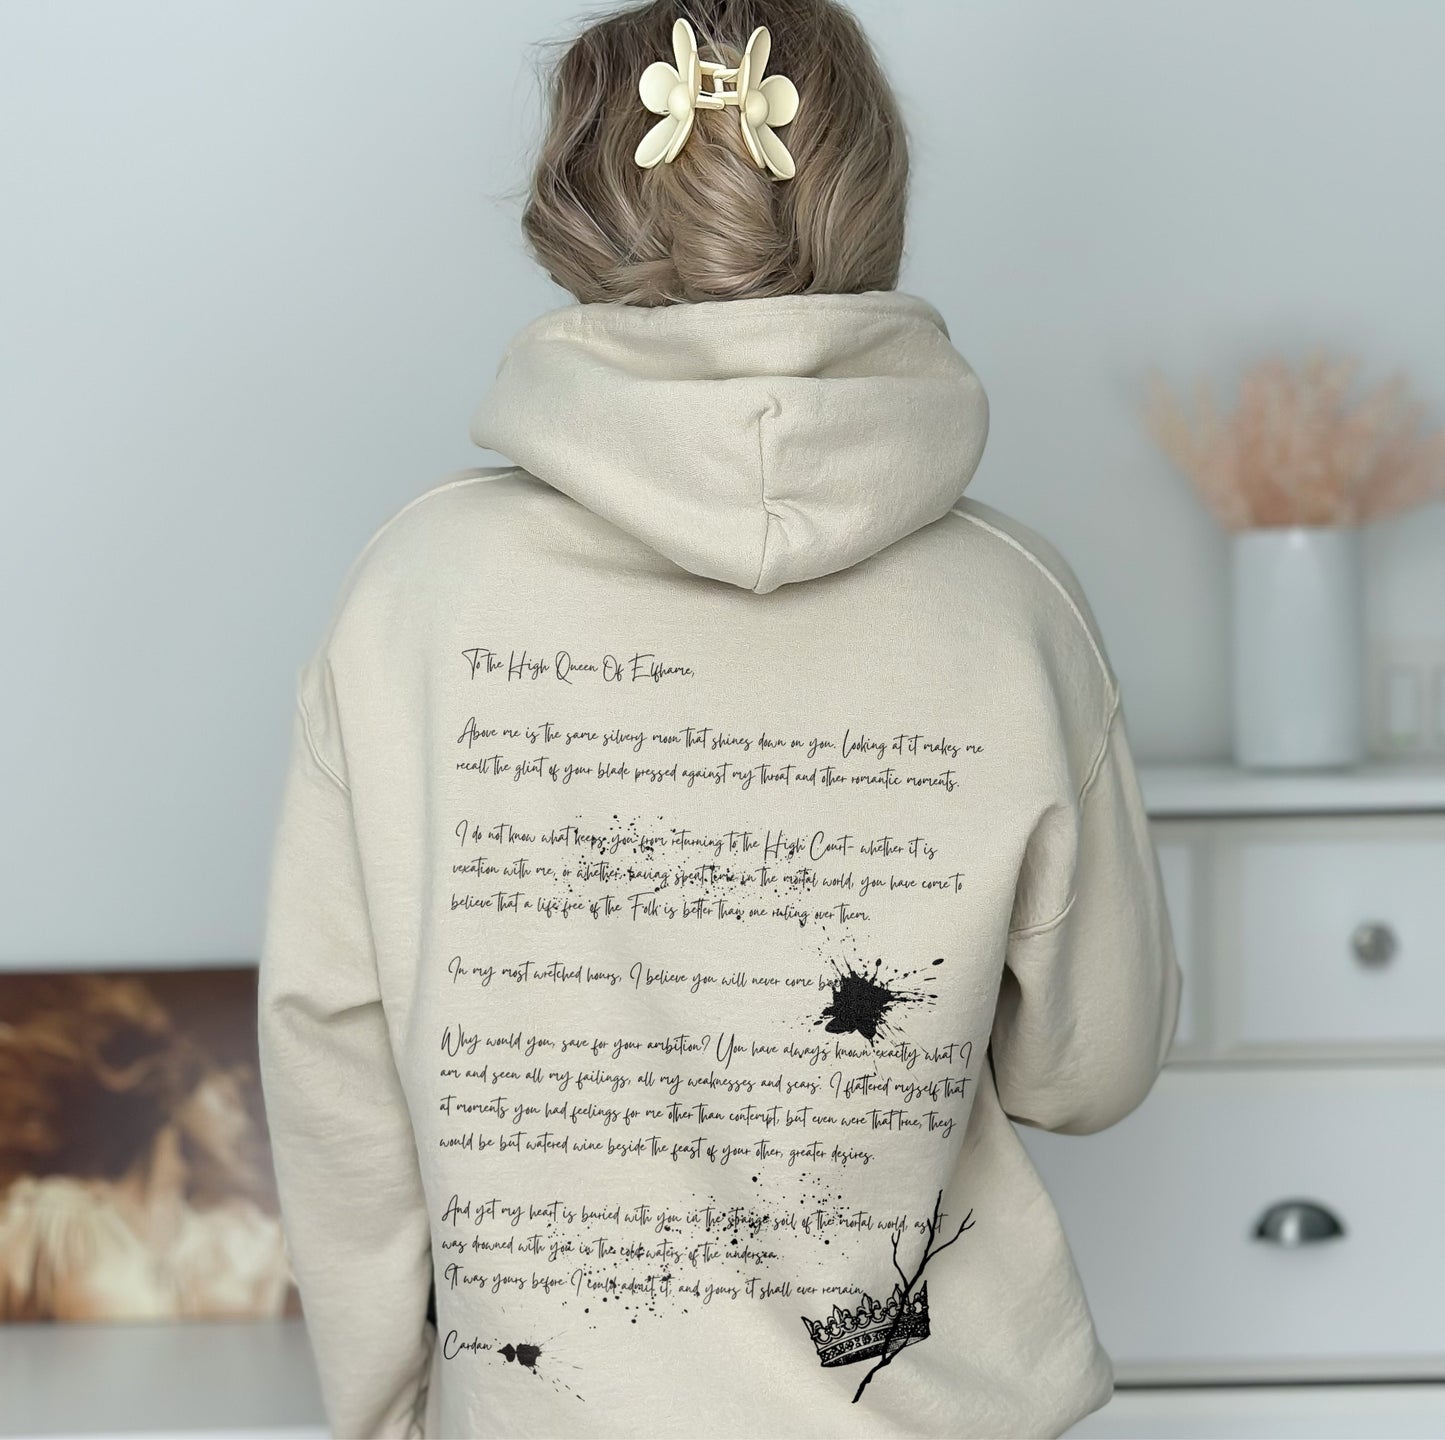 The Cruel Prince Hoodie - The Folk Of The Air Bookish Hooded Sweatshirt - Cardan Letters To Jude Duarte